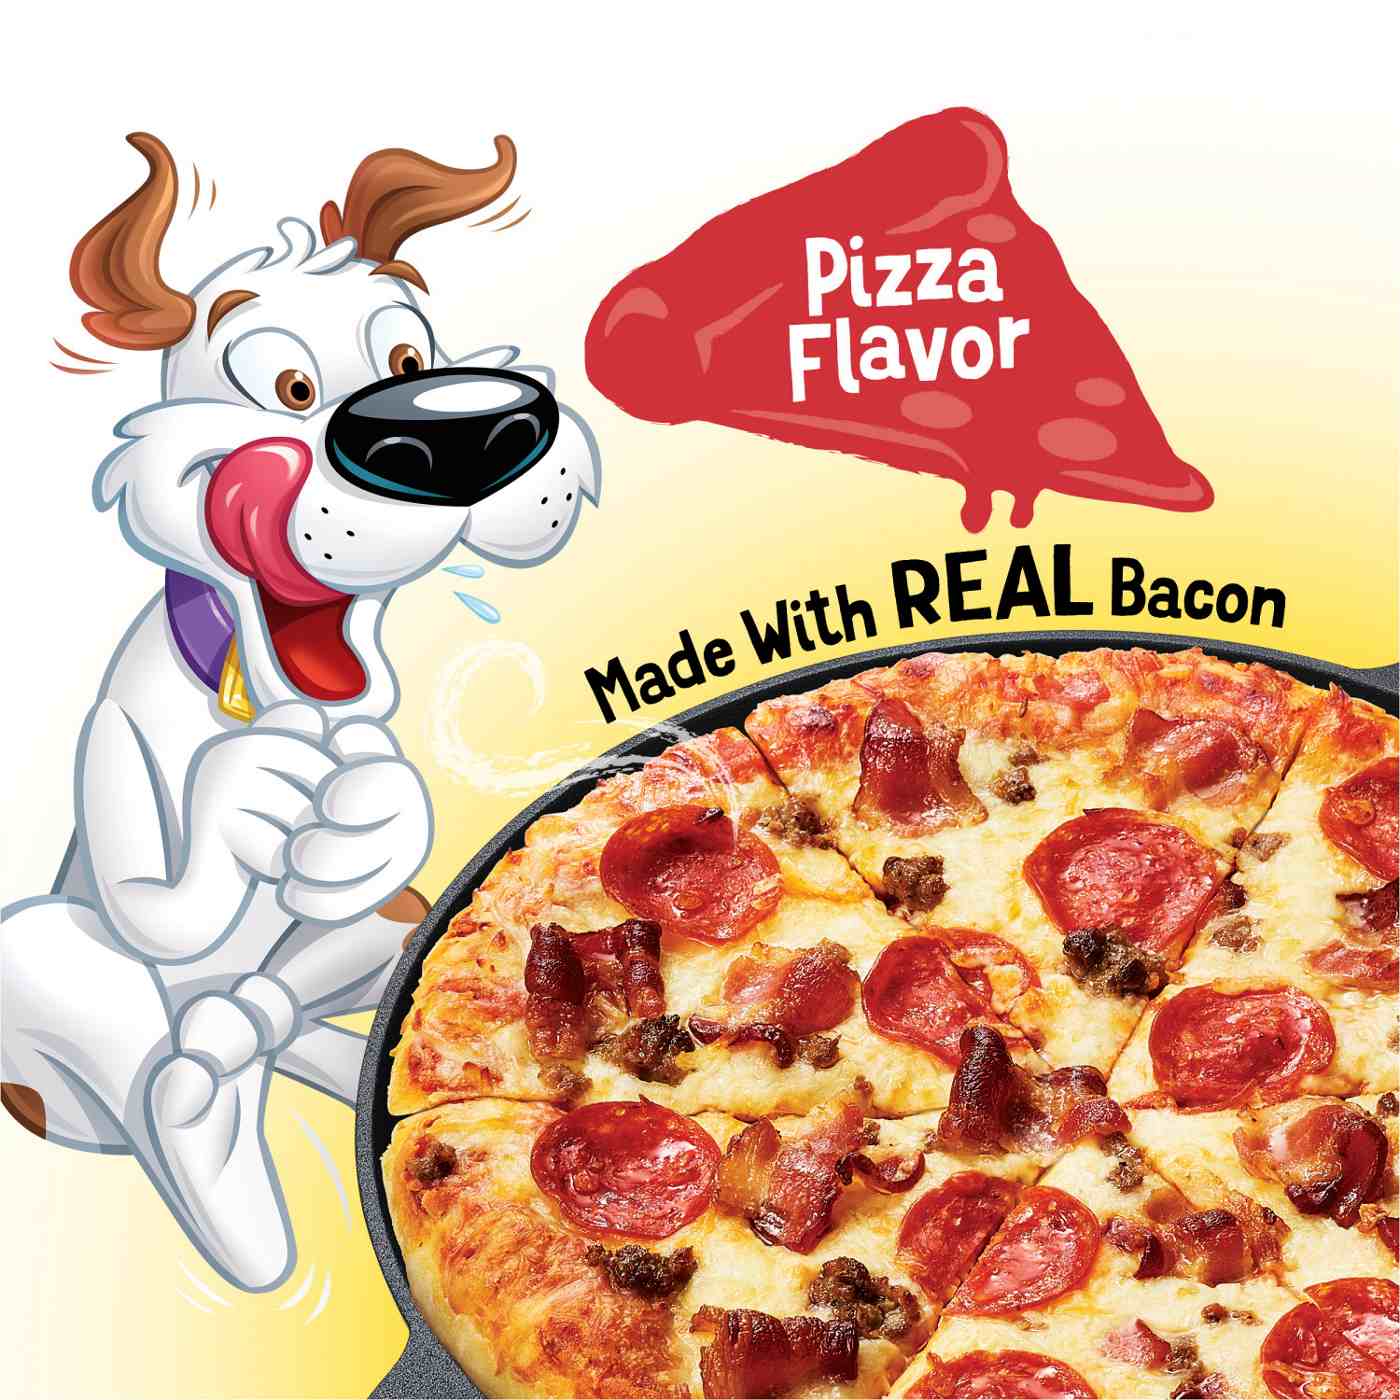 Beggin' Purina Beggin' Dog Treats With Real Bacon, Pizza Flavor; image 7 of 7